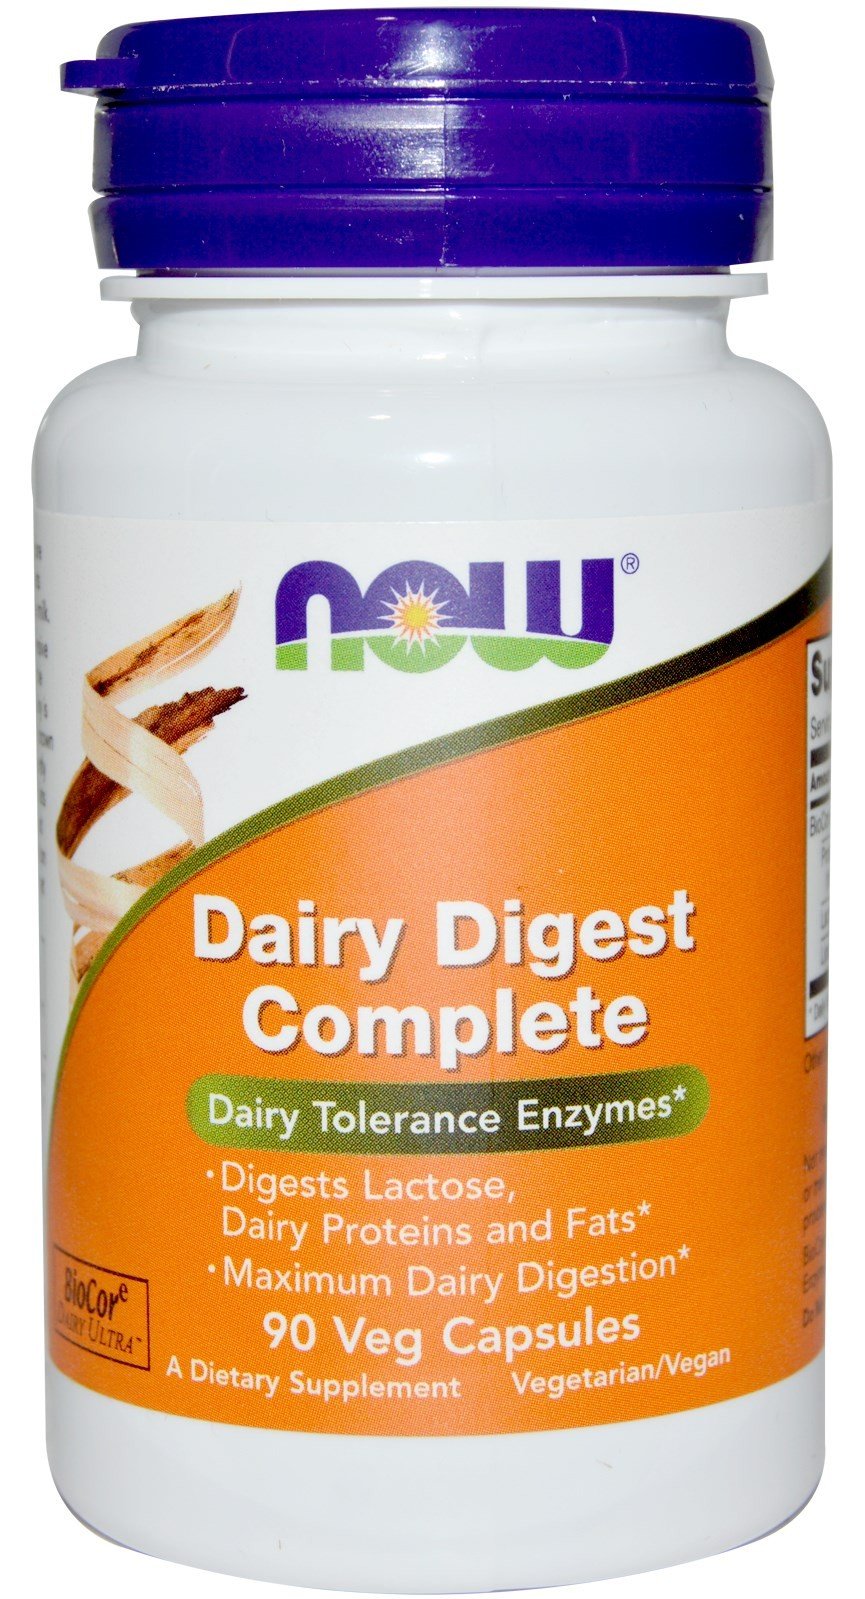 Dairy Digest Complete, 90 шт, Now. Спец препараты. 